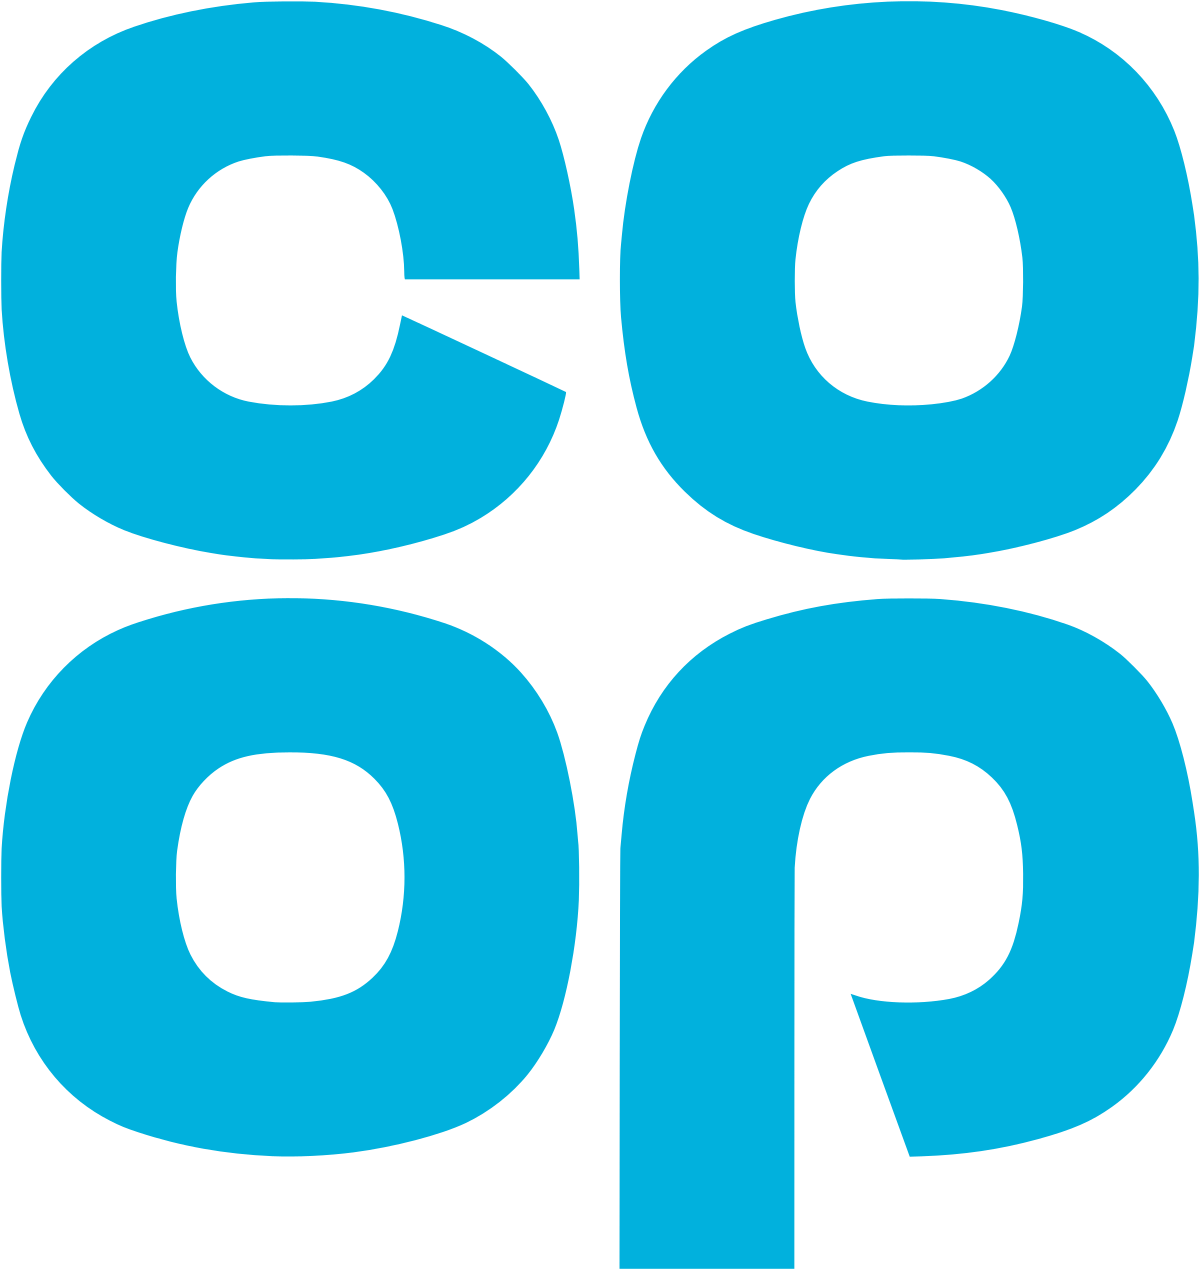 The Co-operative Group (132 Sites)